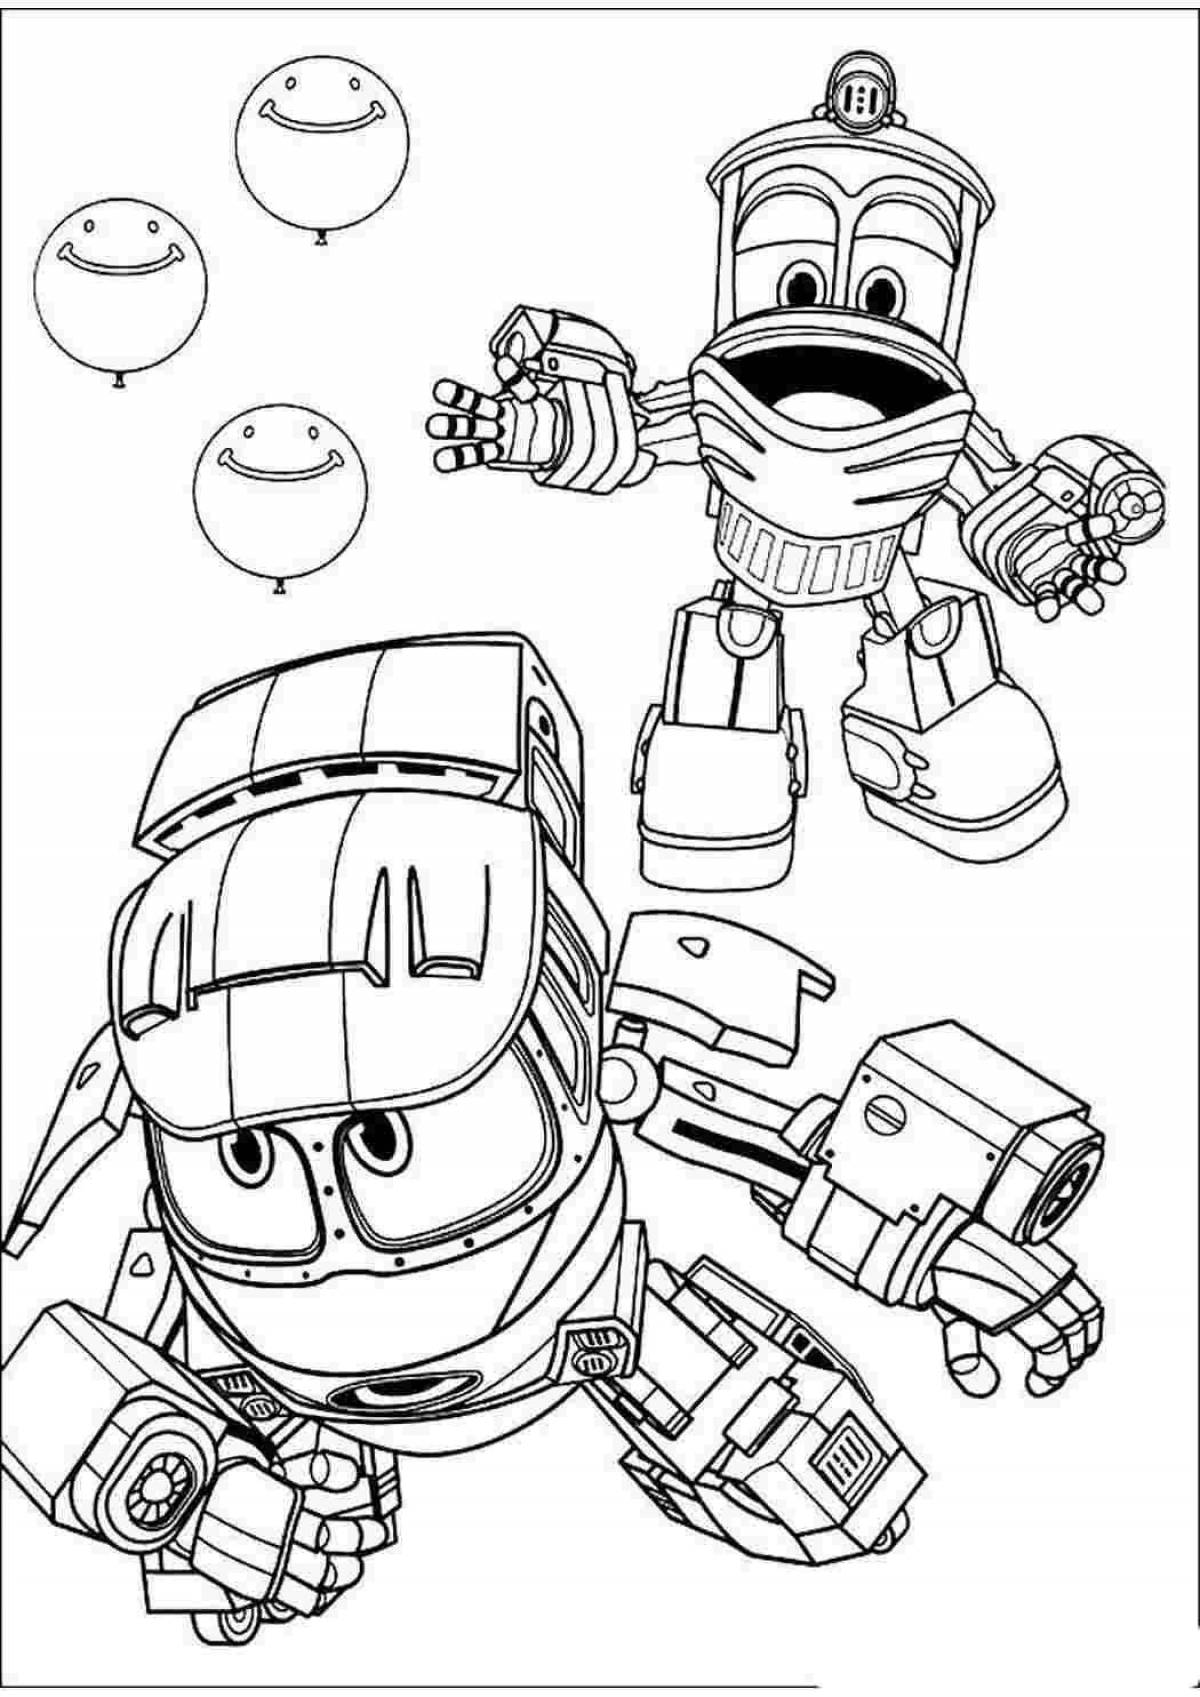 Fascinating Maxi Train Robot Coloring Page